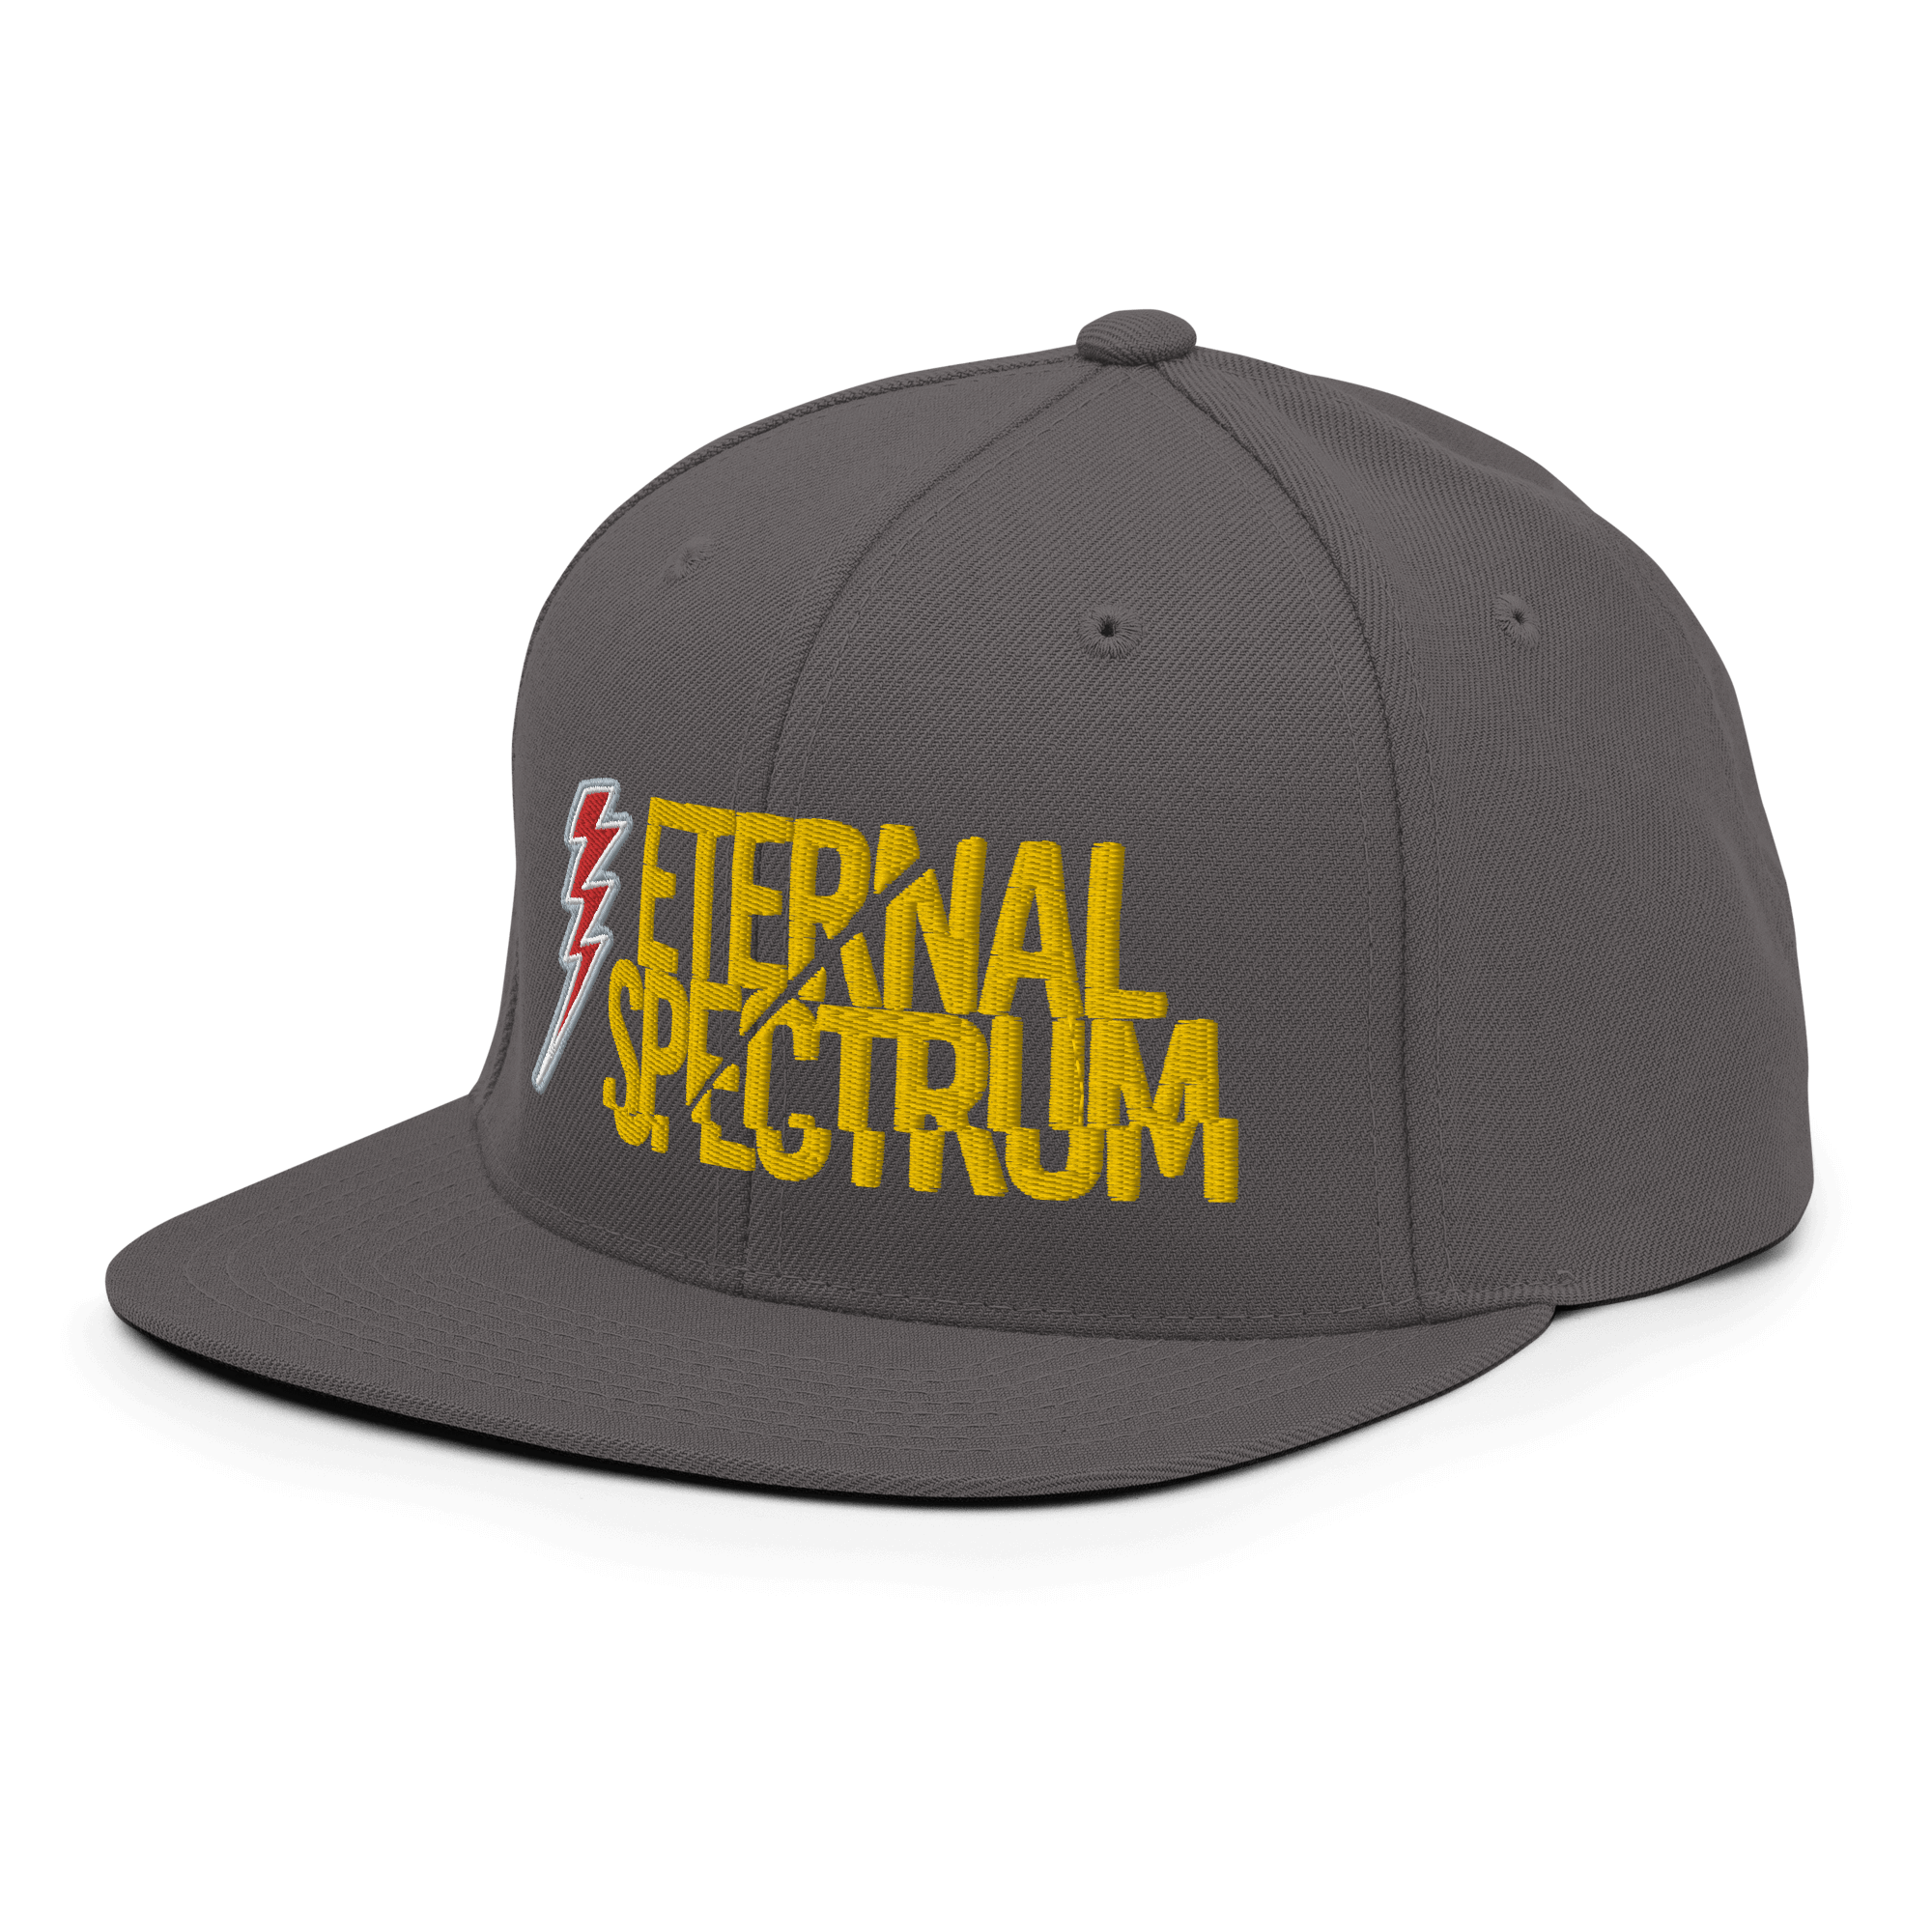 Eternal Spectrum Snapback CapEternal Spectrum Snapback Cap. This hat is structured with a classic fit, flat brim, and full buckram. The adjustable snap closure makes it a comfortable, one-size-fits-most hat. • 80% acrylic, 20% wool• Green Camo is 60% cott